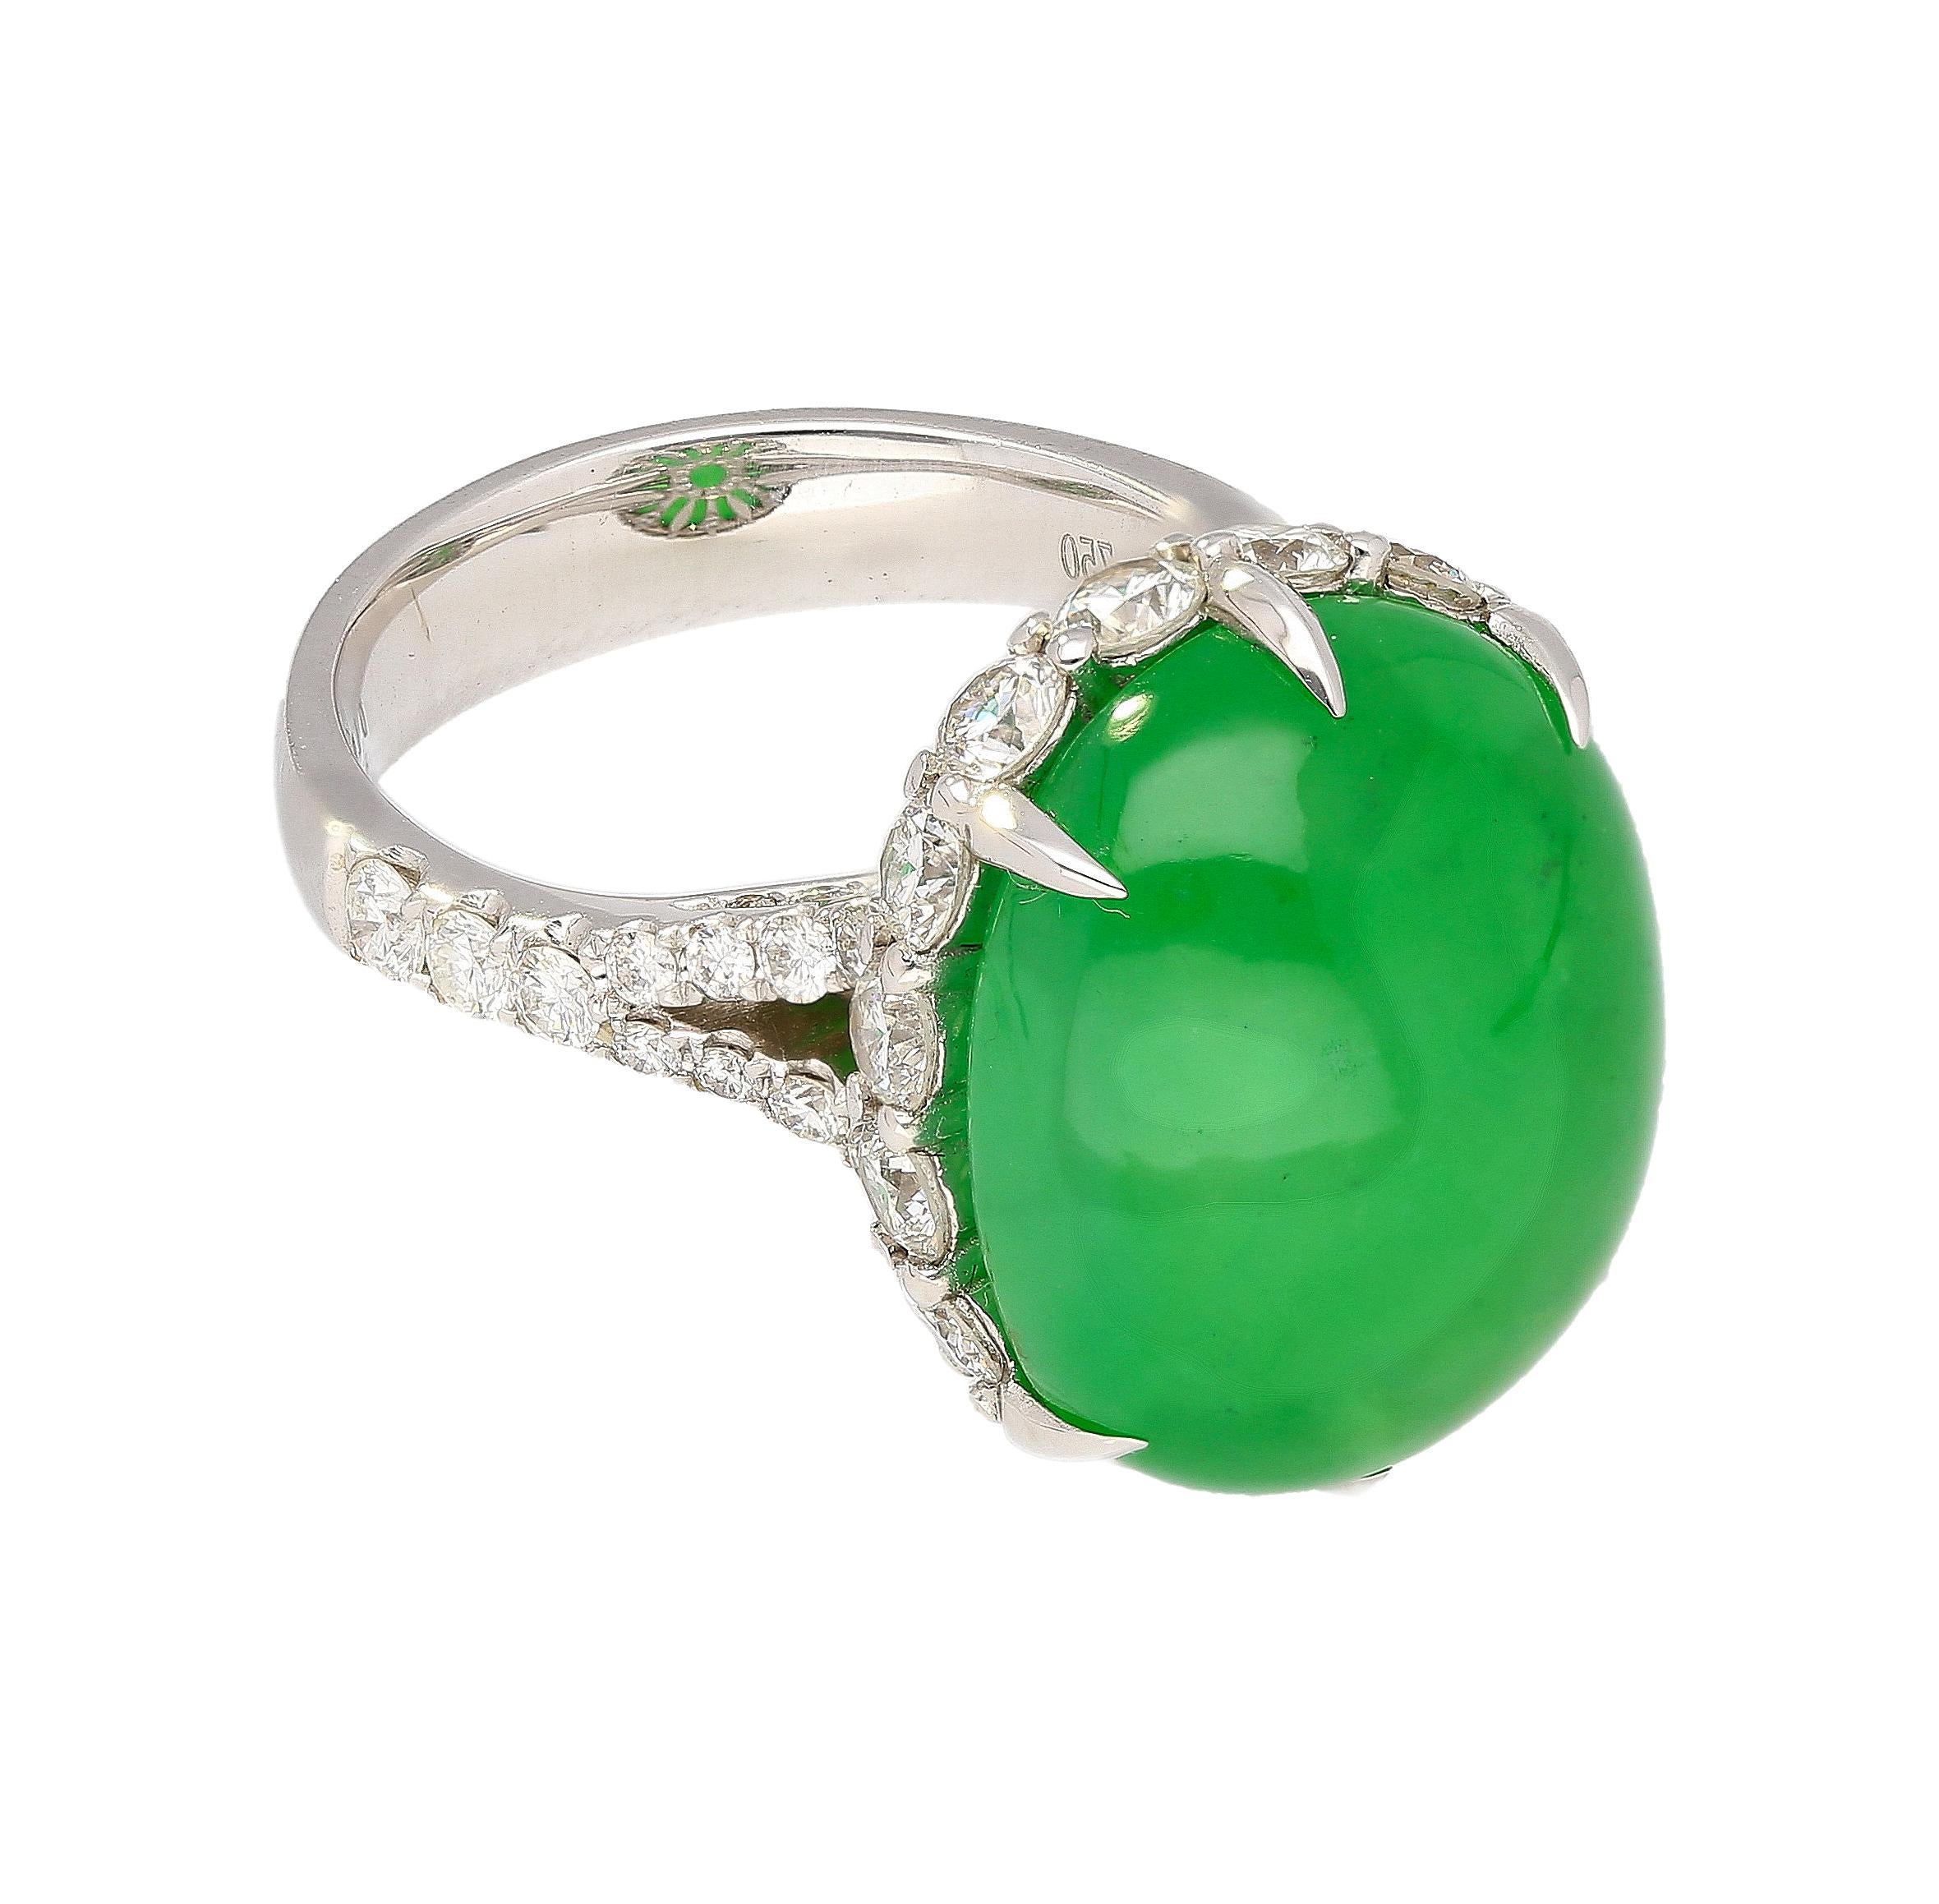 Art Deco 17.86 Carat Oval Cut Jadeite Jade and Diamond Ring in 18K White Gold For Sale